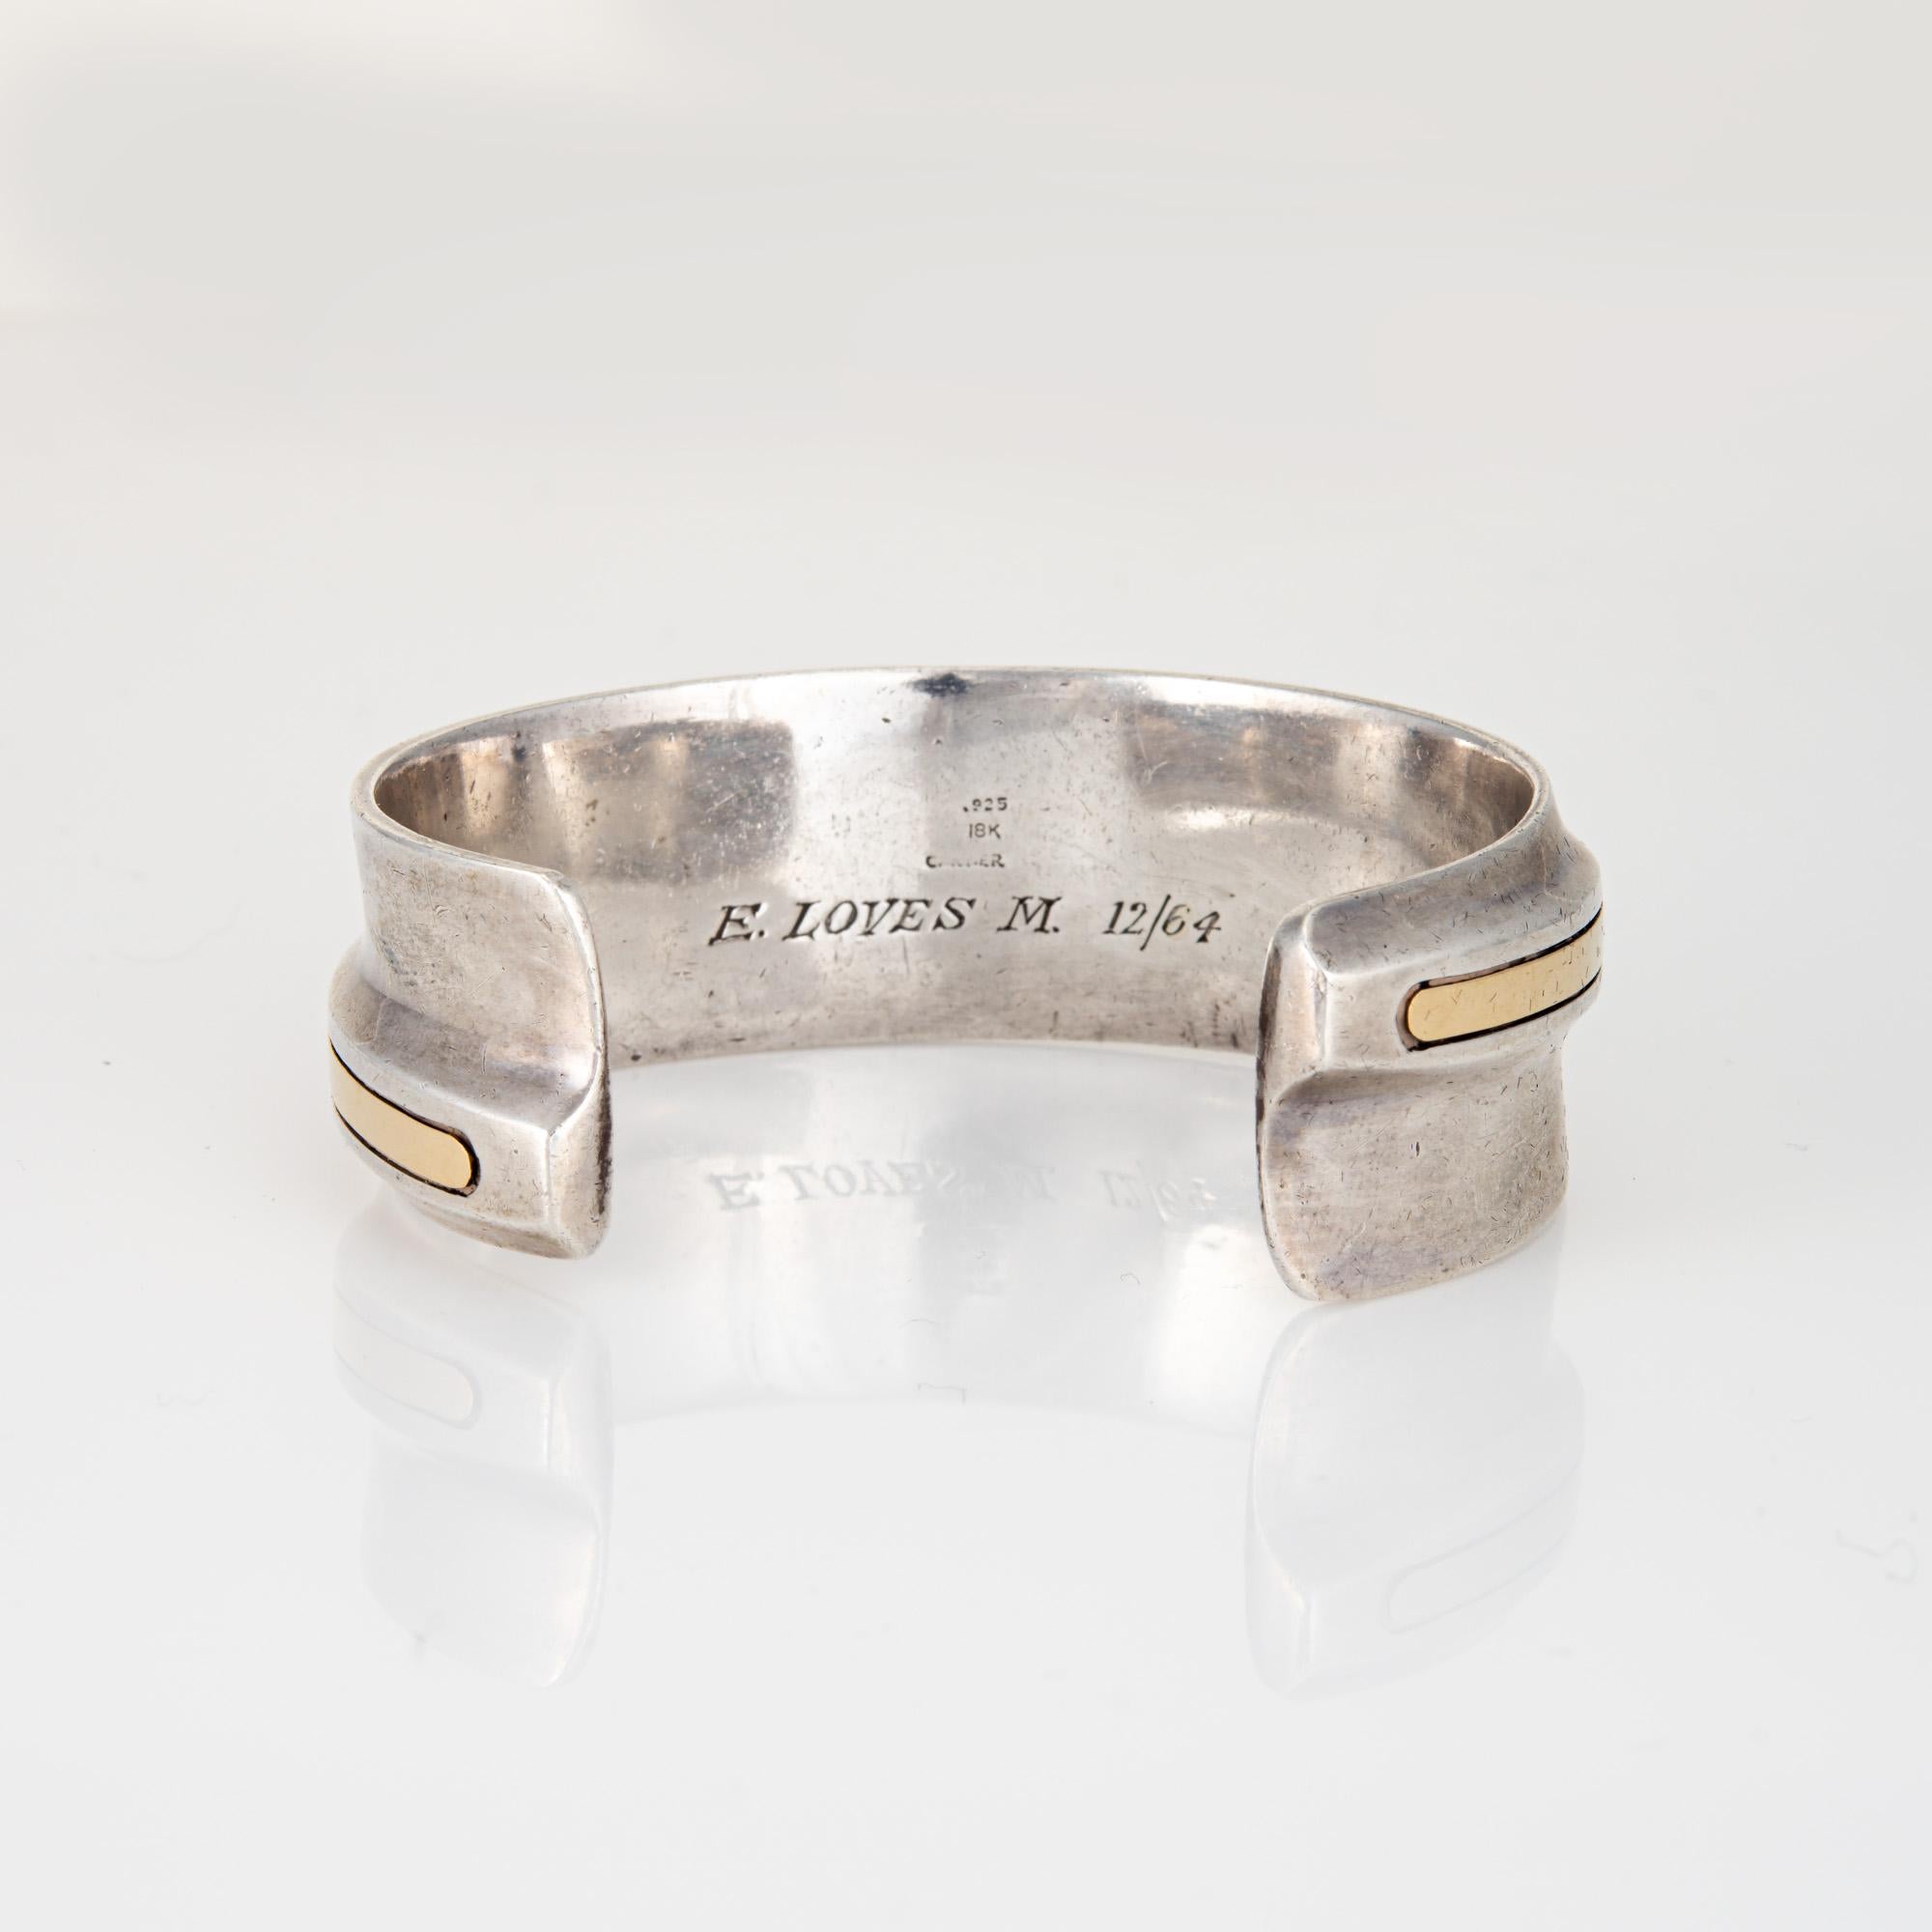 
Stylish vintage Cartier cuff bracelet crafted in sterling silver and 18 karat yellow gold (circa 1964).  

The sculptural cuff is a Cartier classic, with a raised gold applied center and sterling silver surrounds. The inner bracelet is engraved 